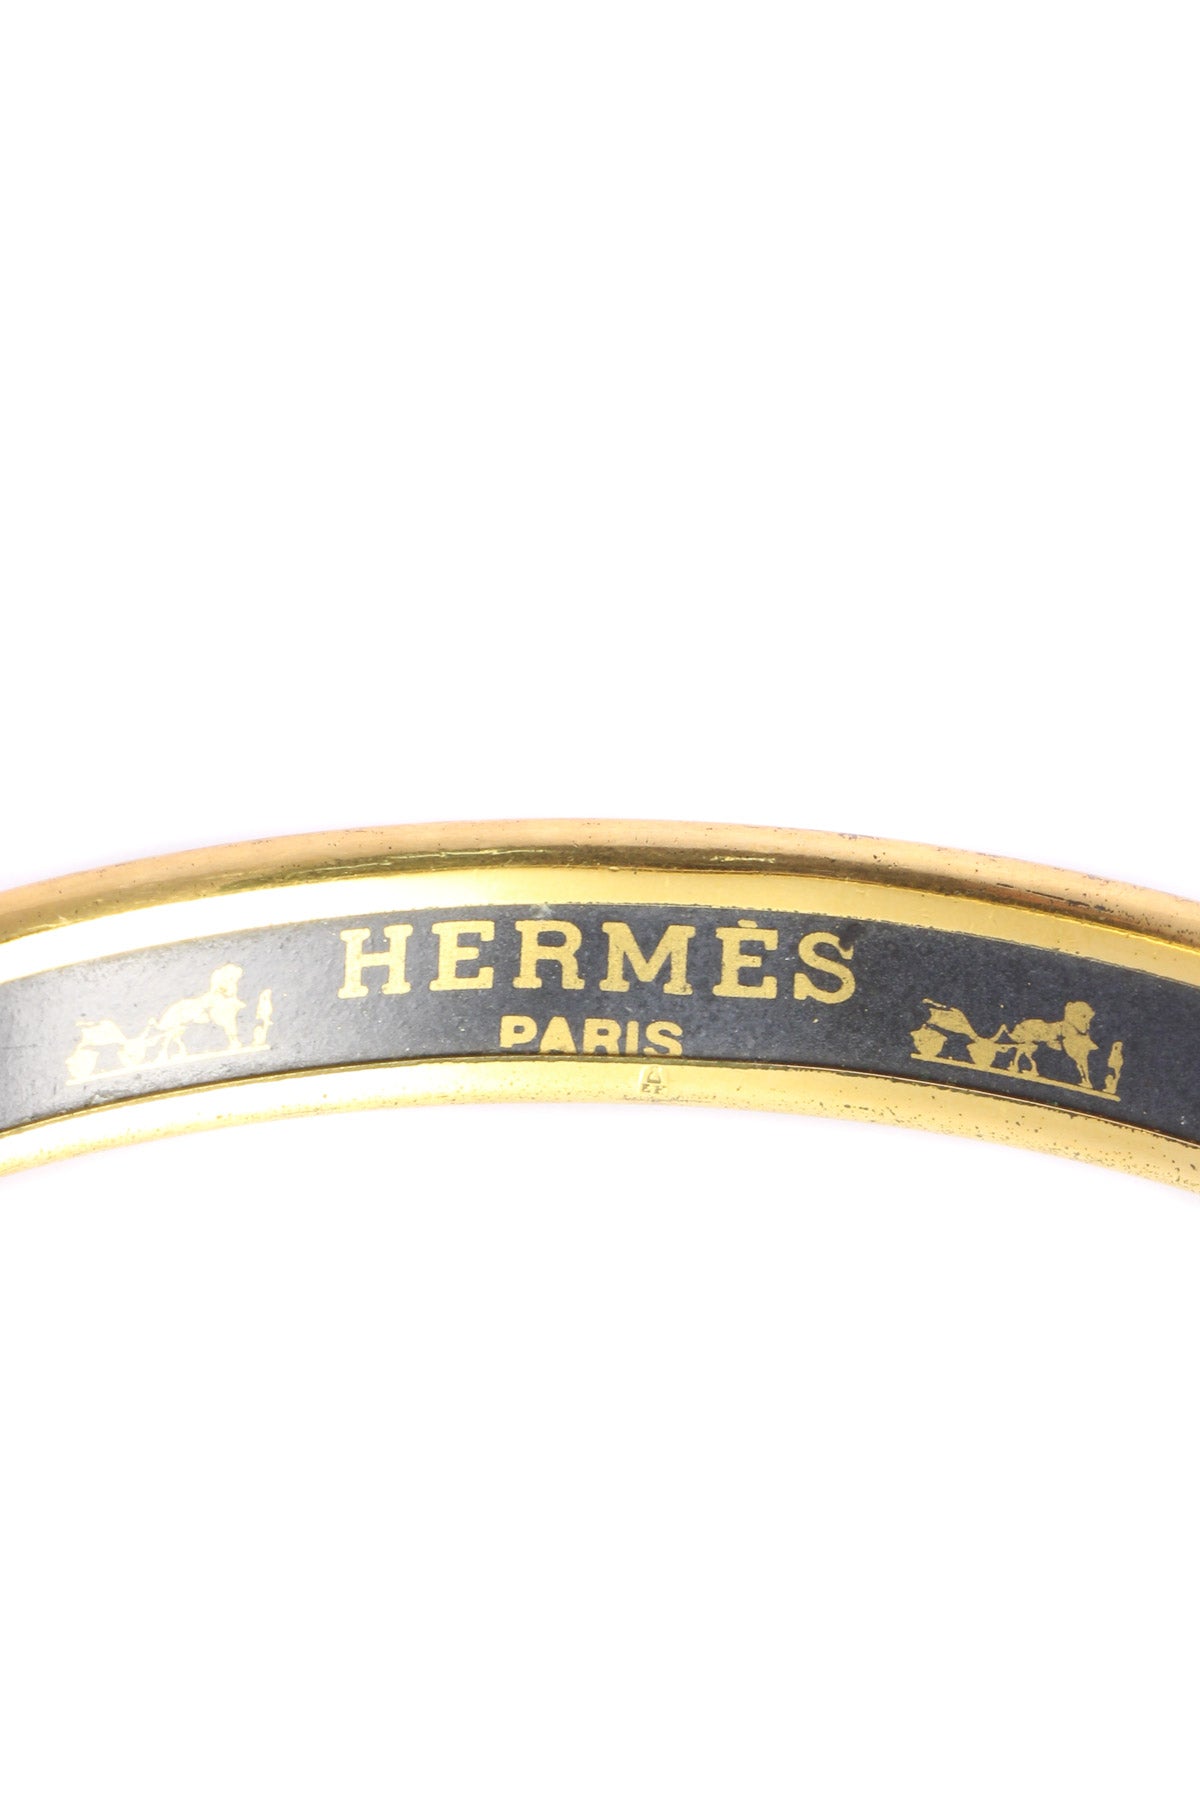 Pre-Owned Hermes Kelly Cable Tour Bracelet